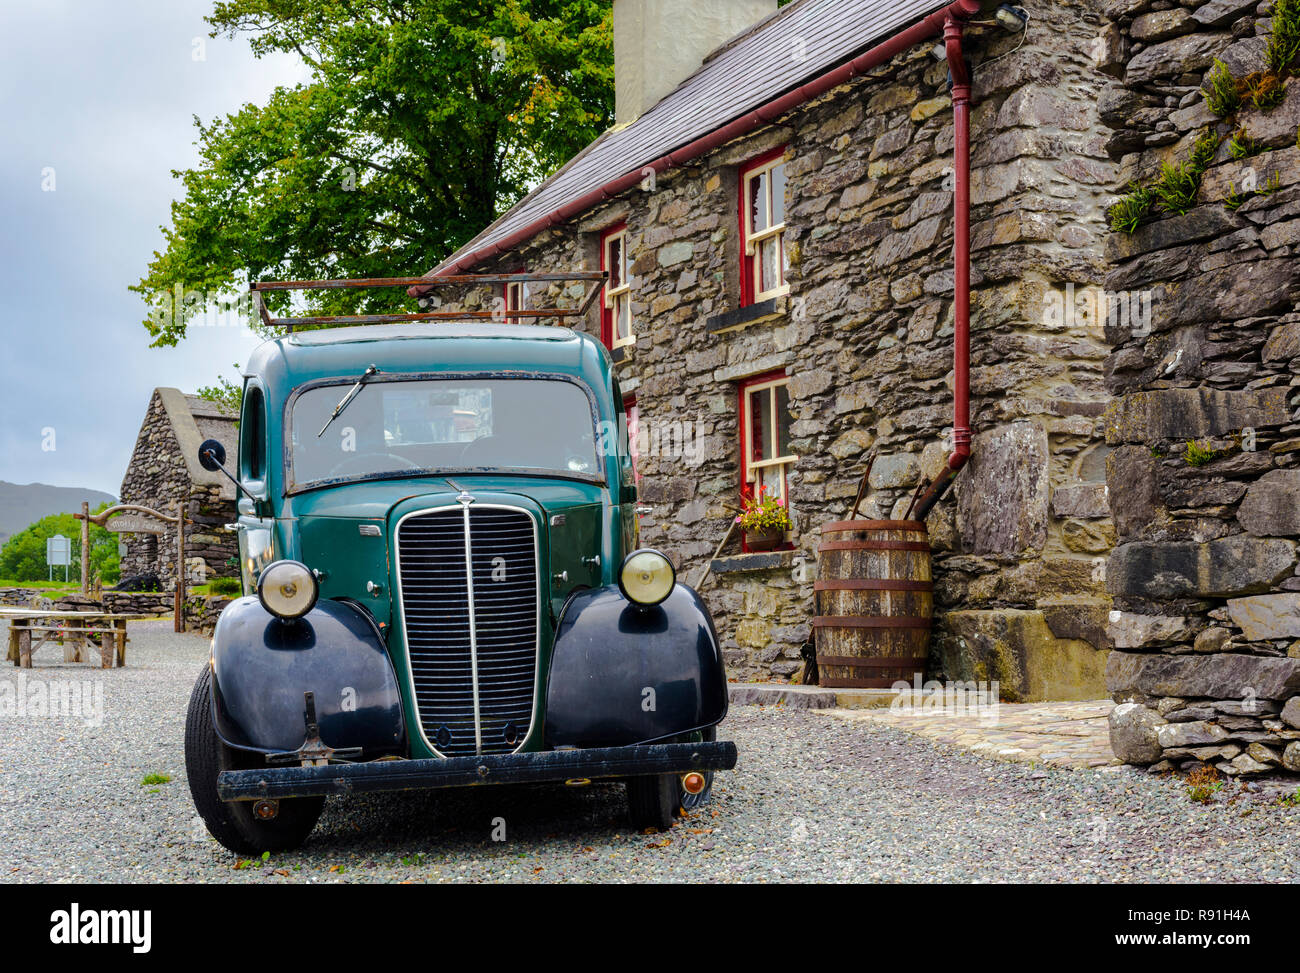 Oldtimer car in front of Molly Gallivan's a traditional Irish Farm House in Releigh, Ireland Stock Photo